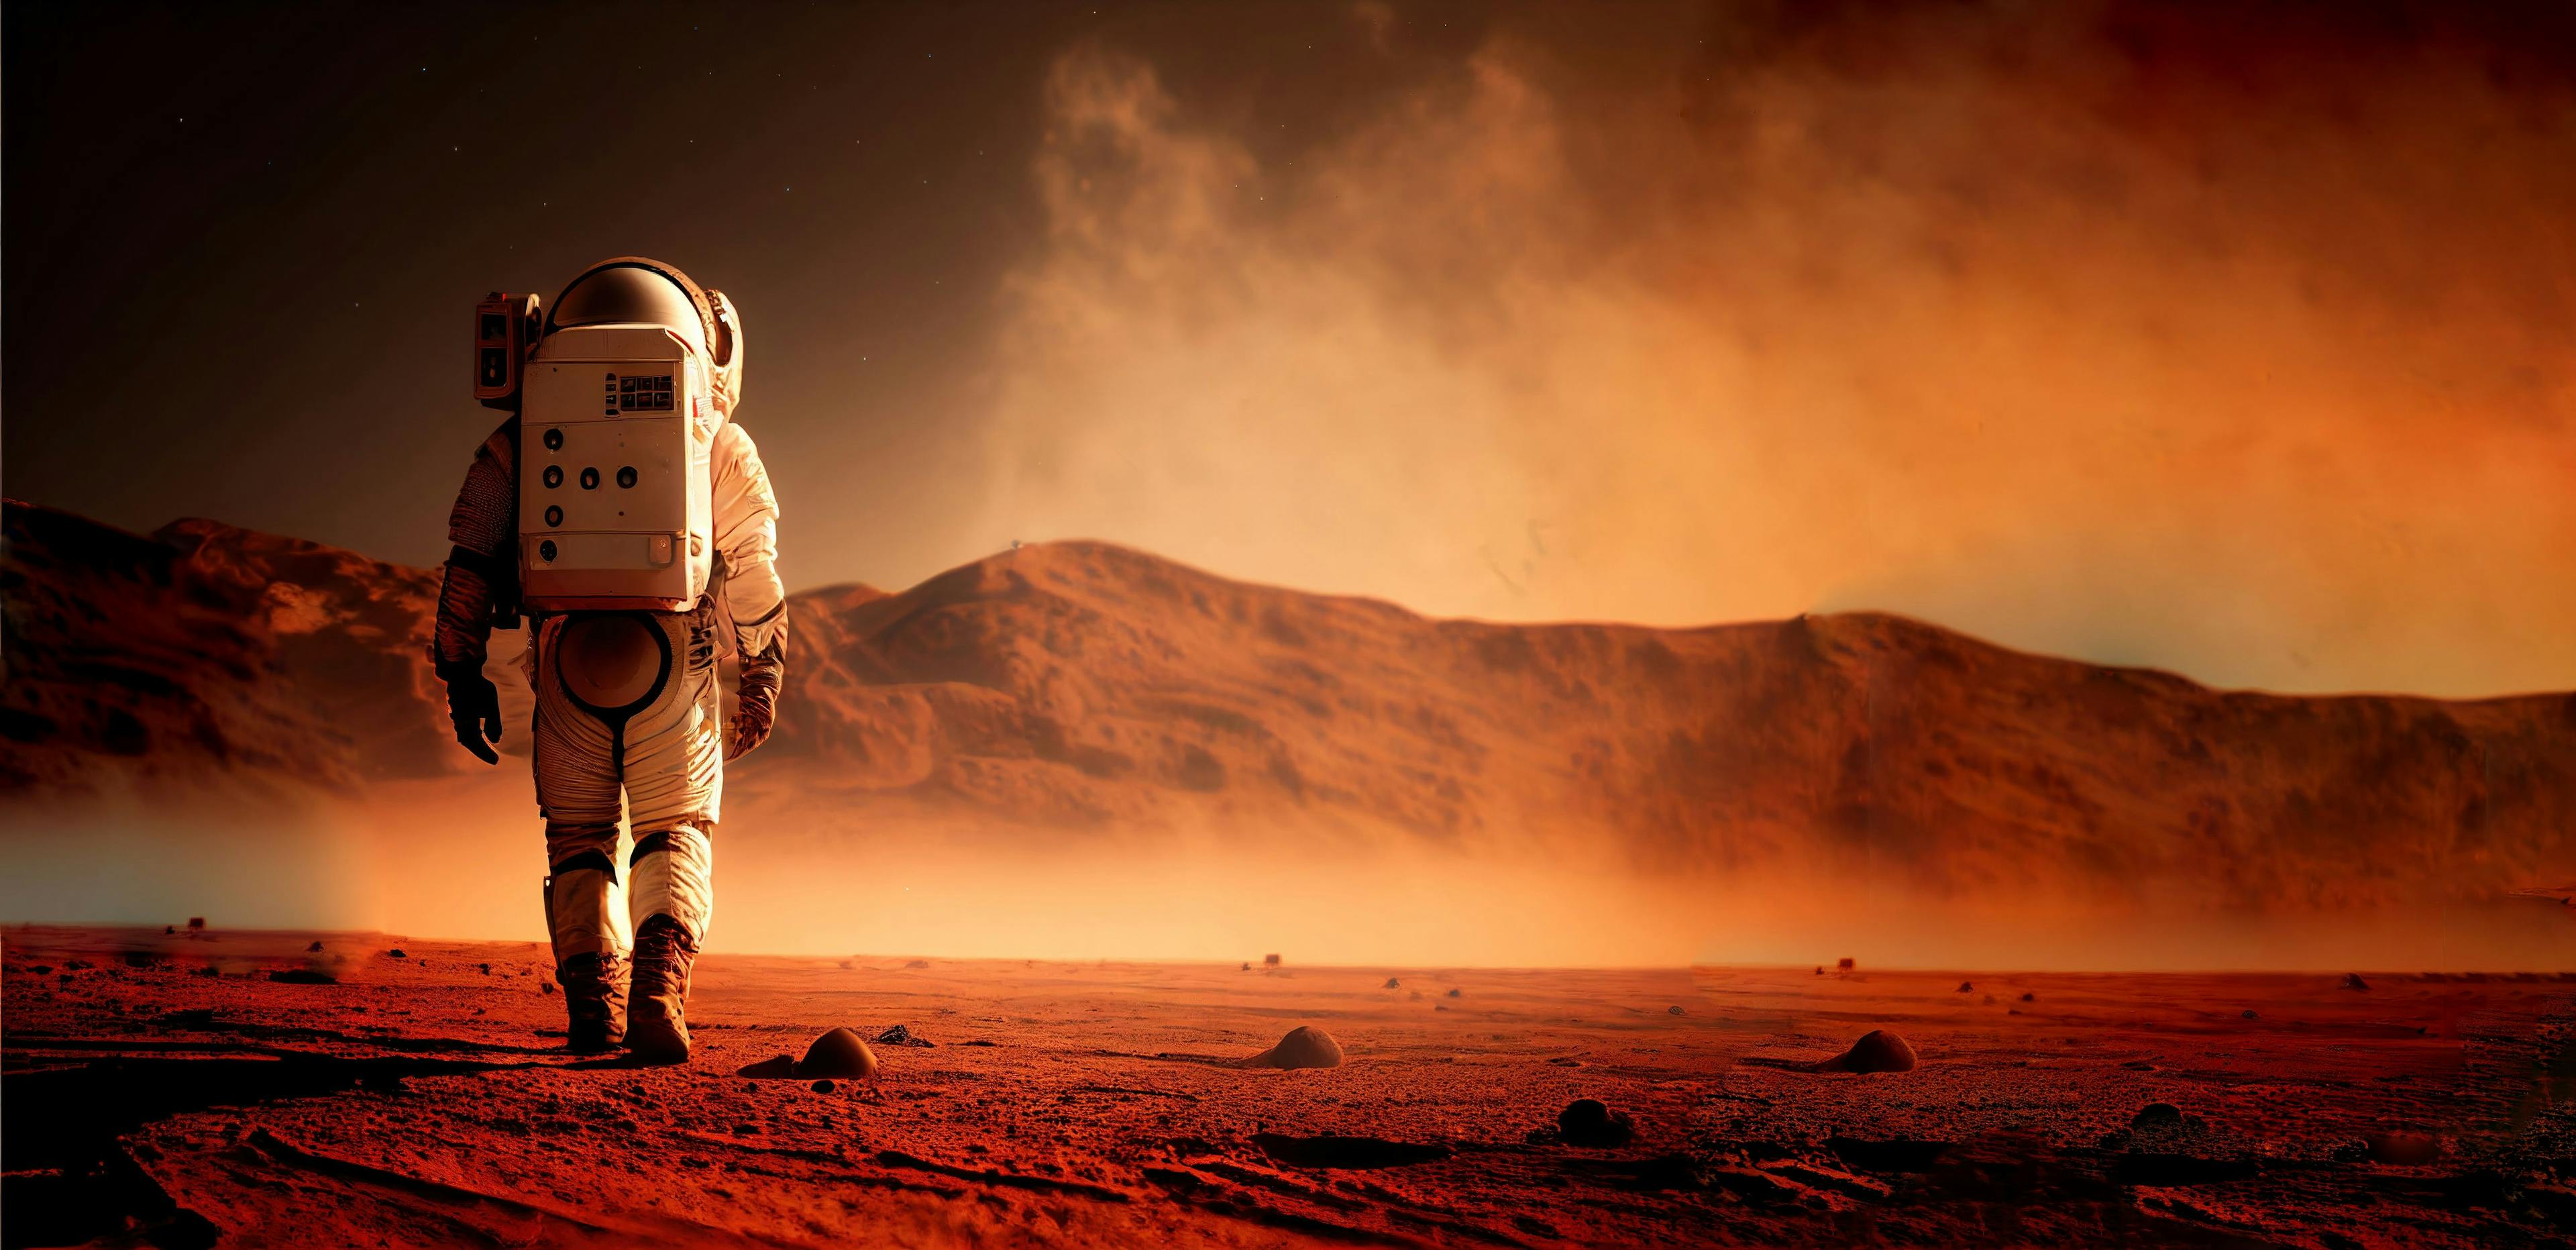 Astronaut on mars the red planet. Landscape with desert and mountains, Colonization of Mars, generative ai | Image Credit: © viperagp - stock.adobe.com